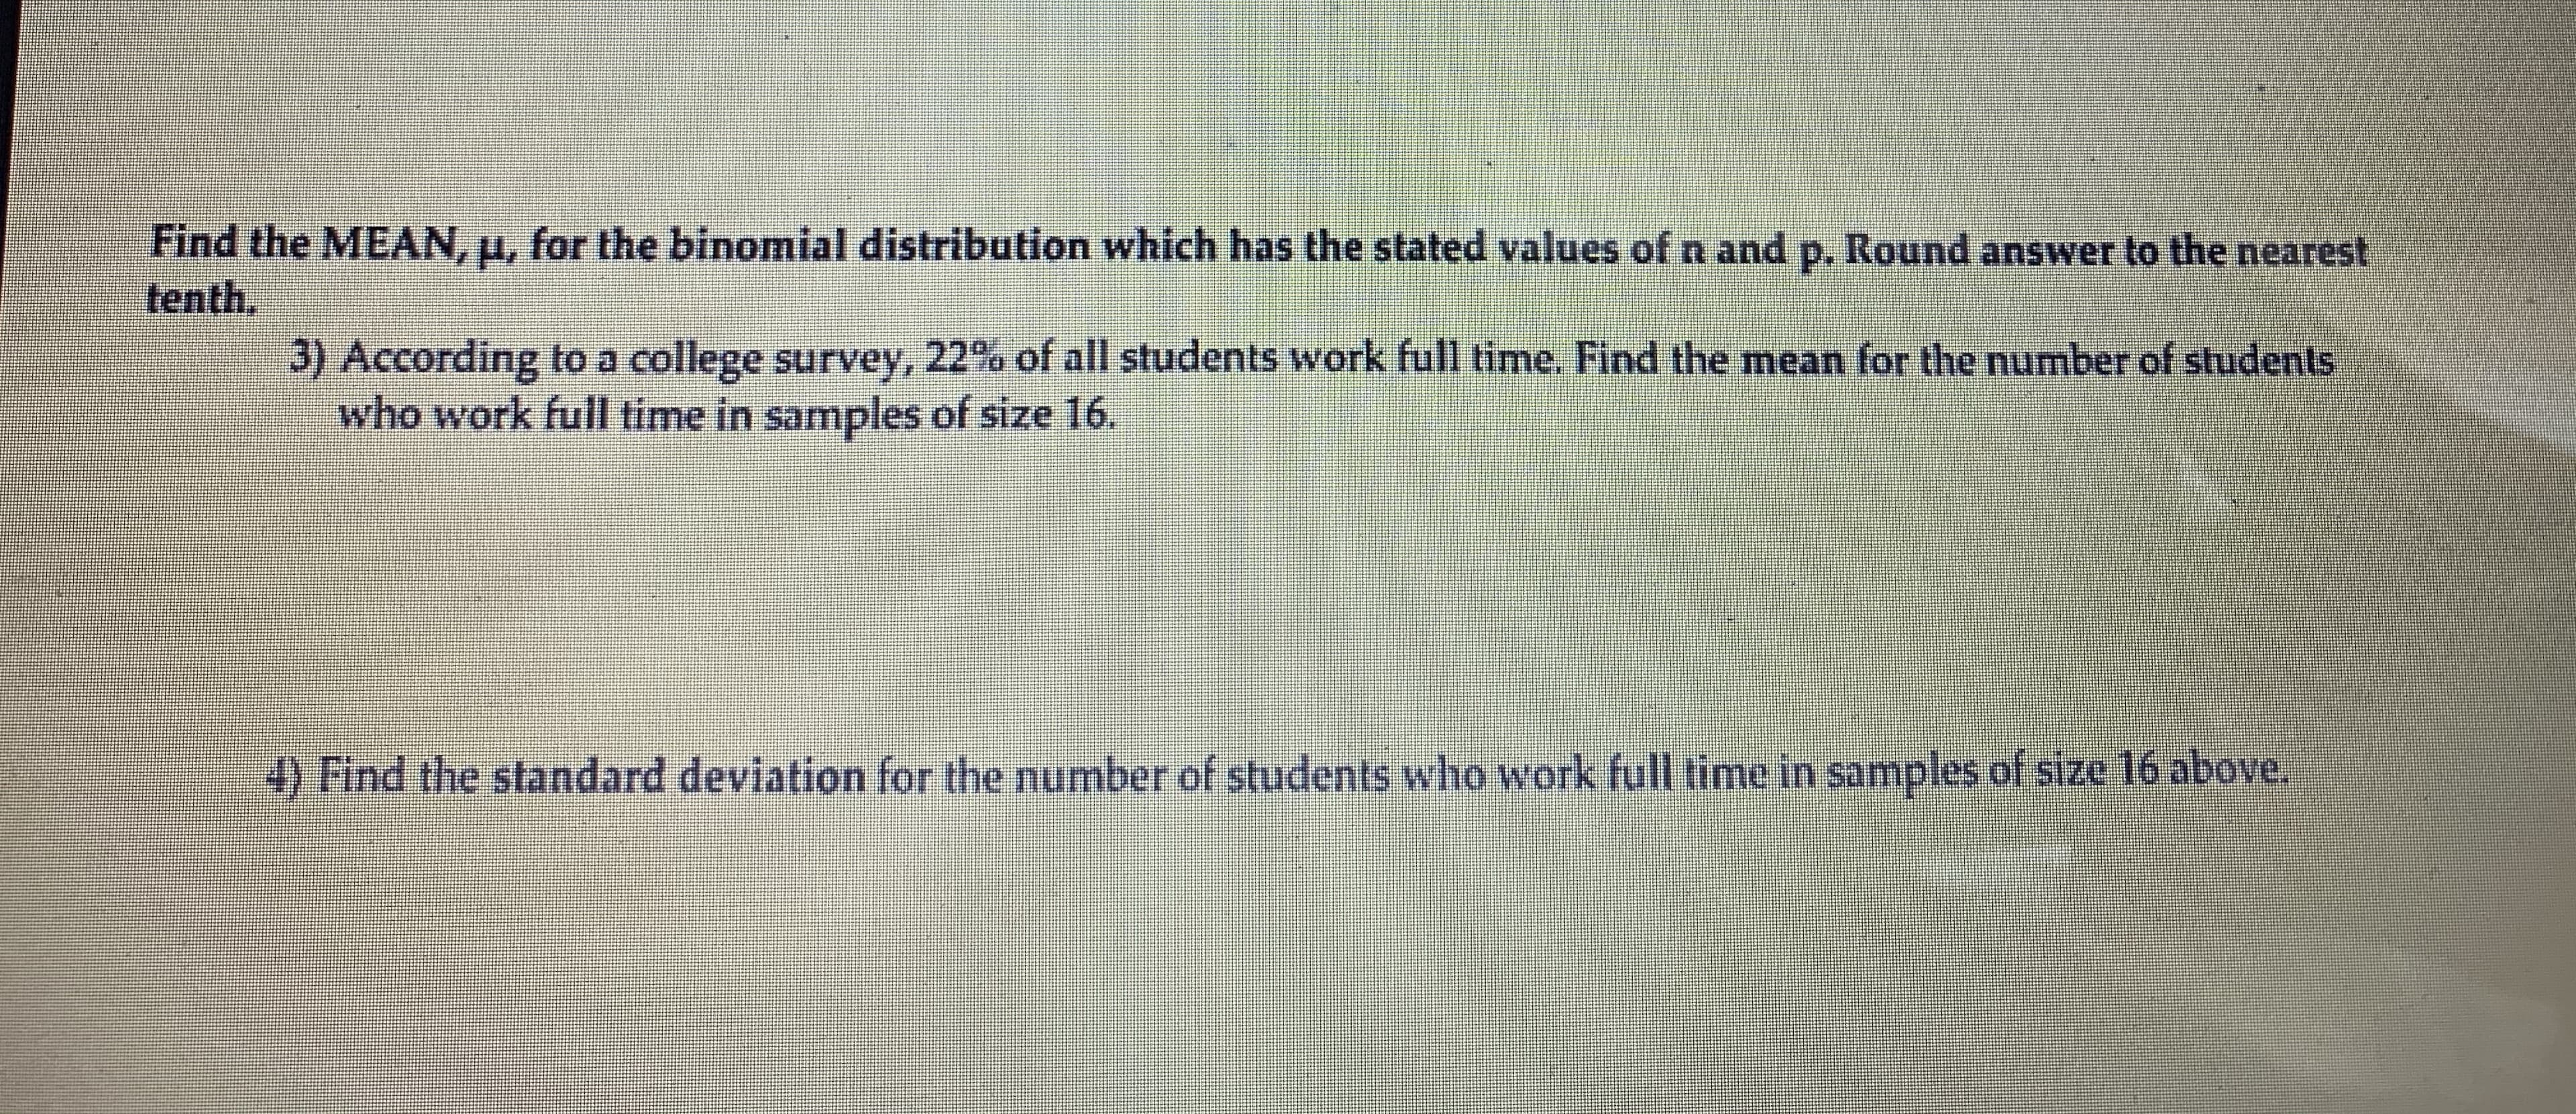 Find the MEAN, u, for the binomial distribution which has the stated values of n and p. Round answer to the nearest
tenth,
3) According to a college survey, 22% of all students work full time. Find the mean for the number of students
who work full time in samples of size 16.
4) Find the standard deviation for the number of students who work full time in samples of size 16 above.
